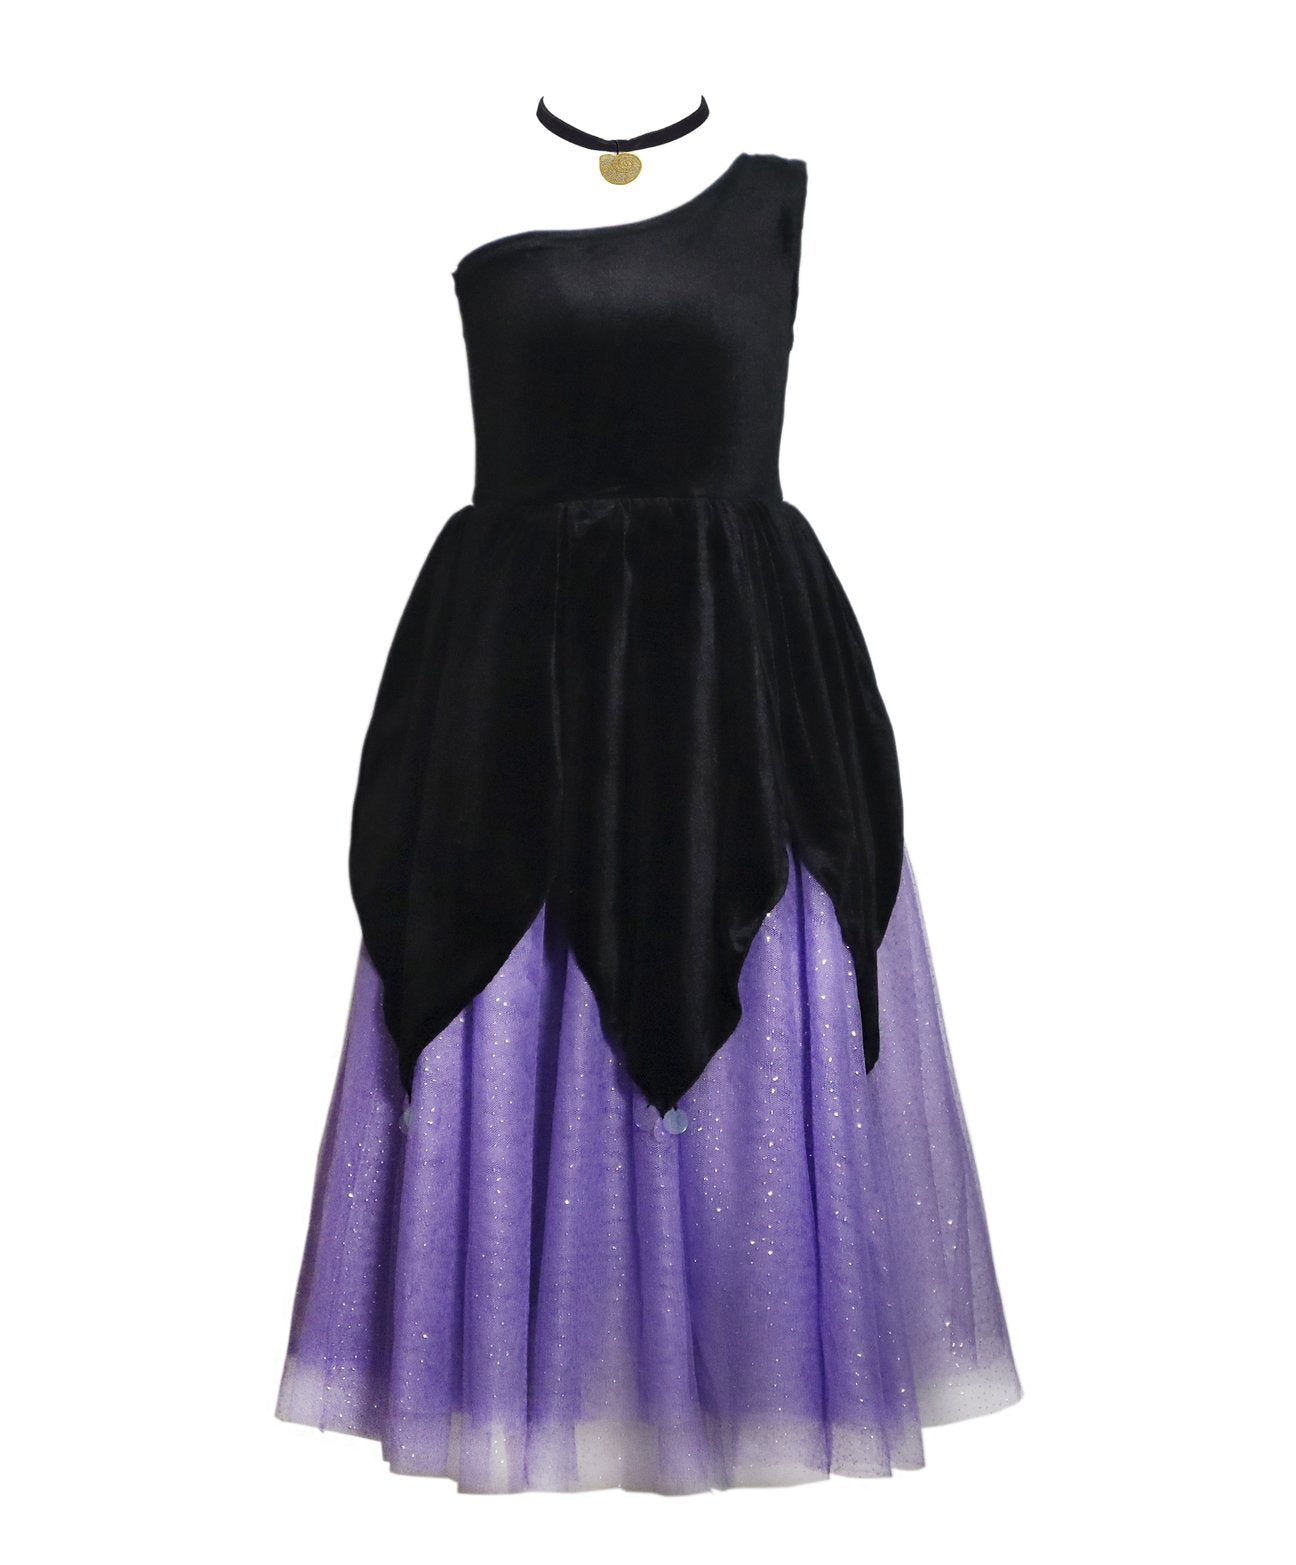 Teresita Orillac - The Sea Witch from The Little Mermaid, Black Costume Dress - Two Little Birds Boutique